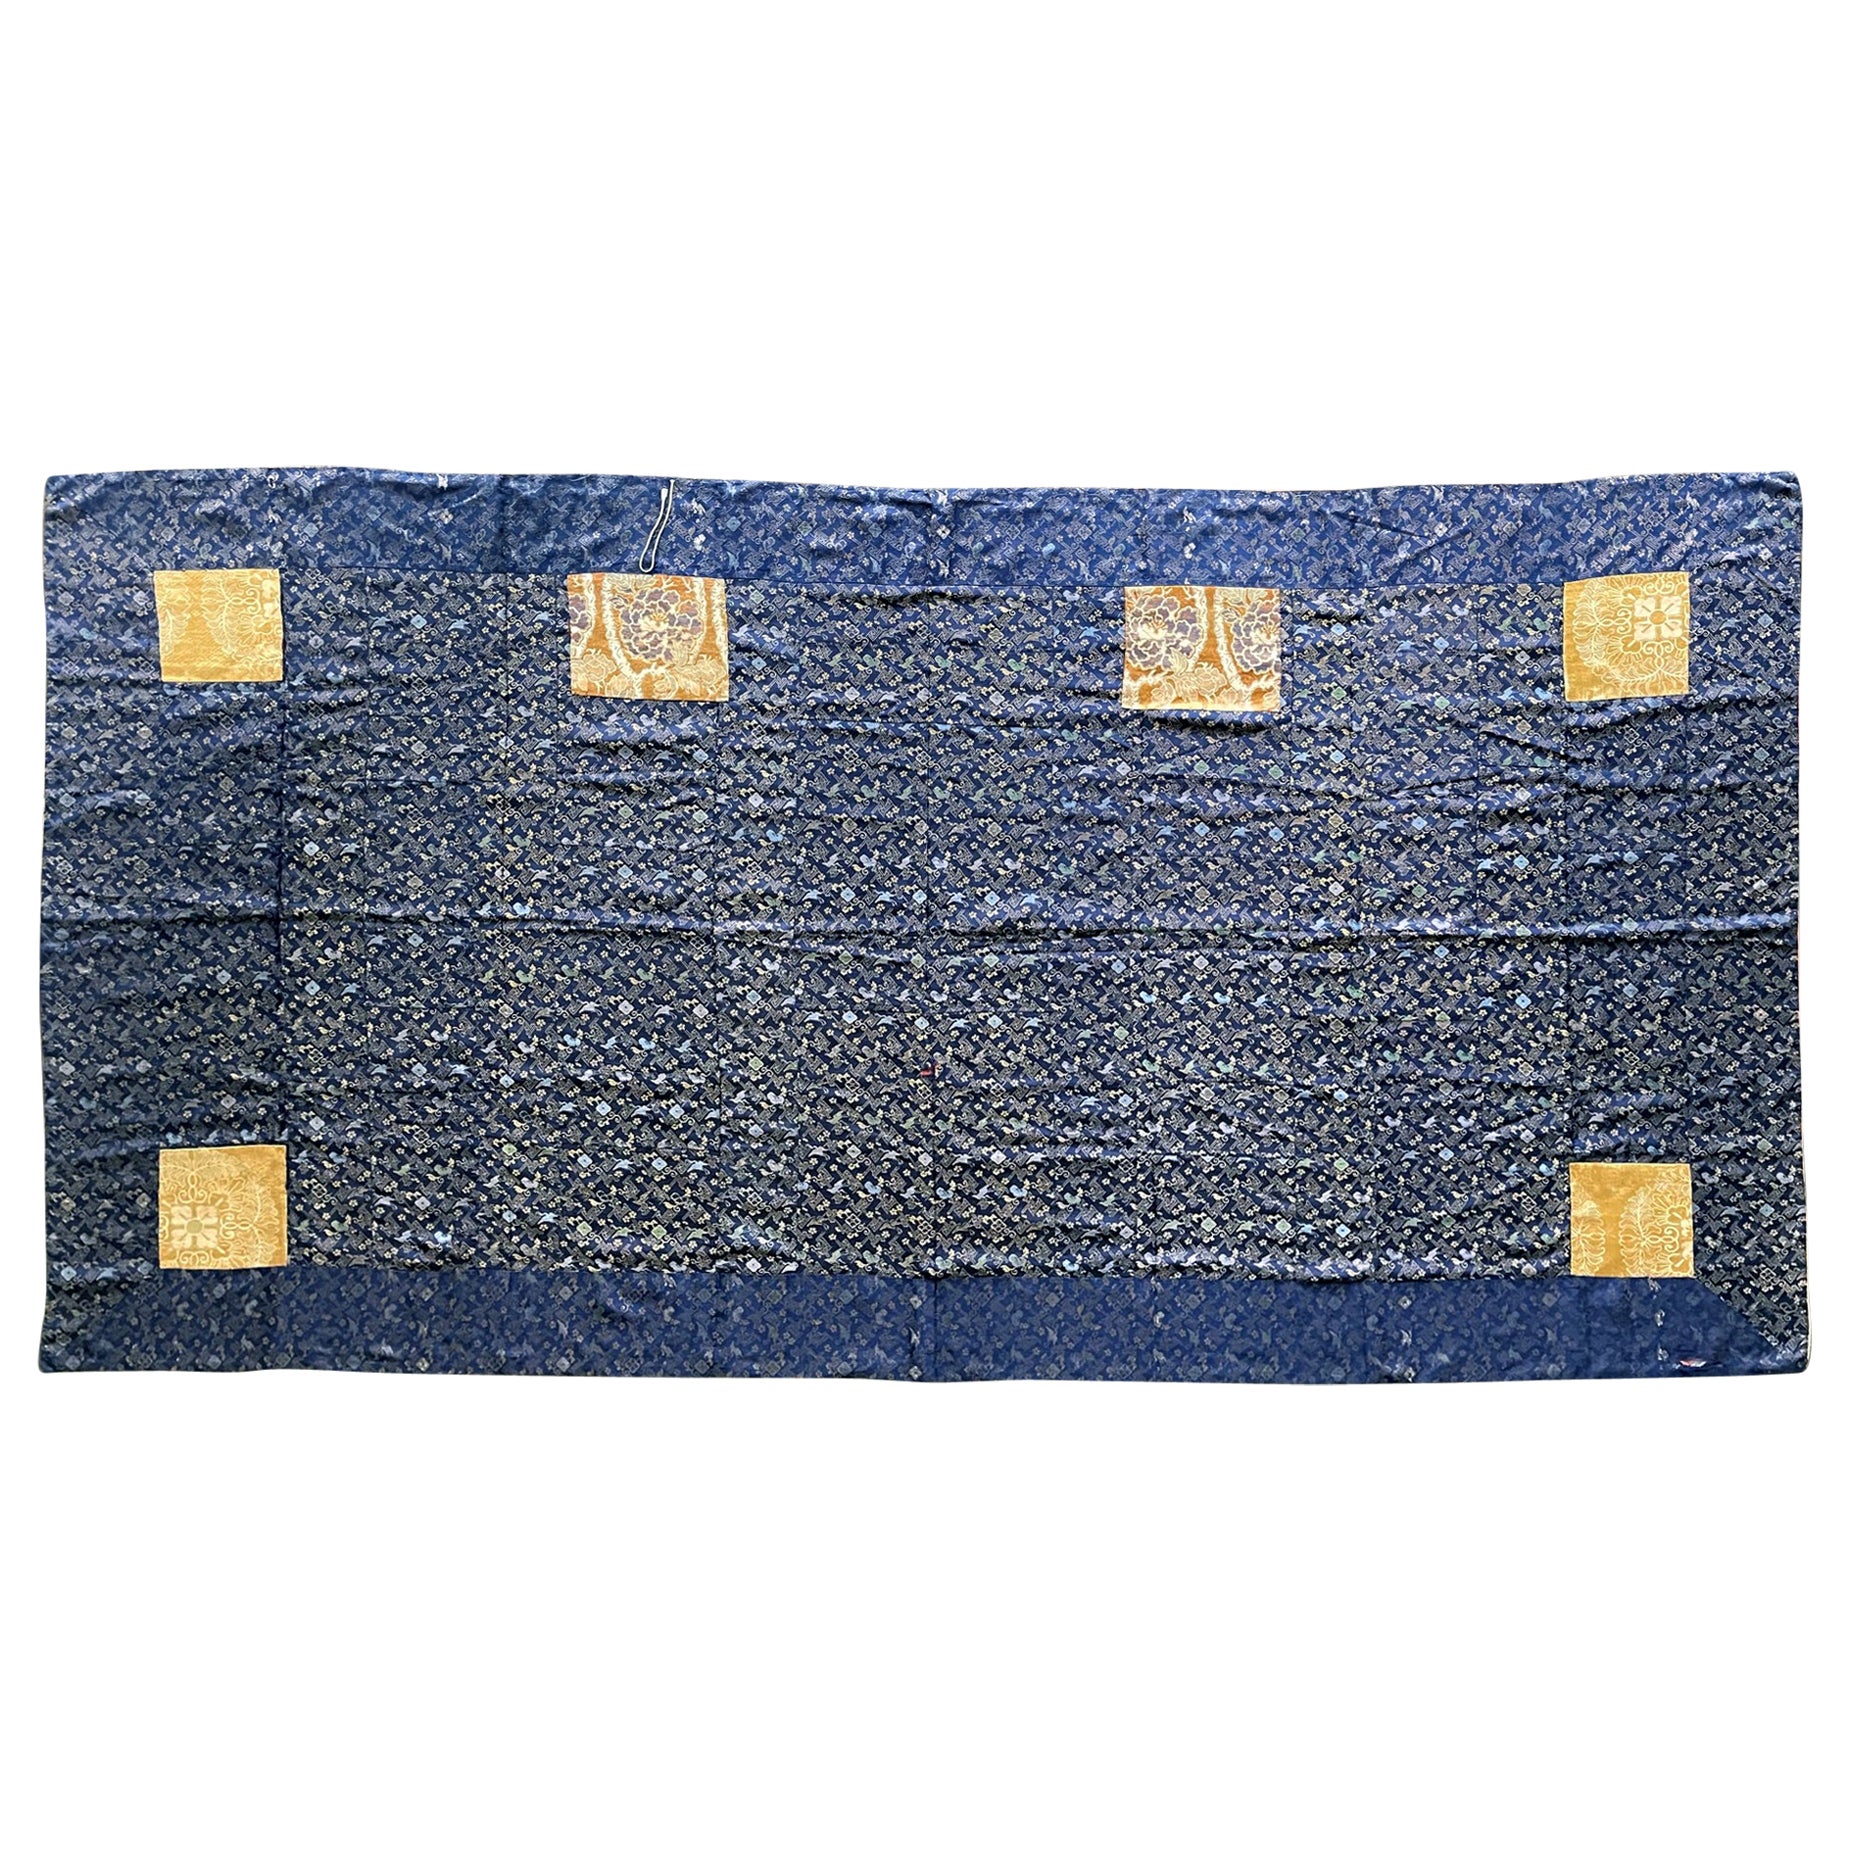 Japanese Monastery Robe Patchwork Kesa with inscription Edo Period For Sale